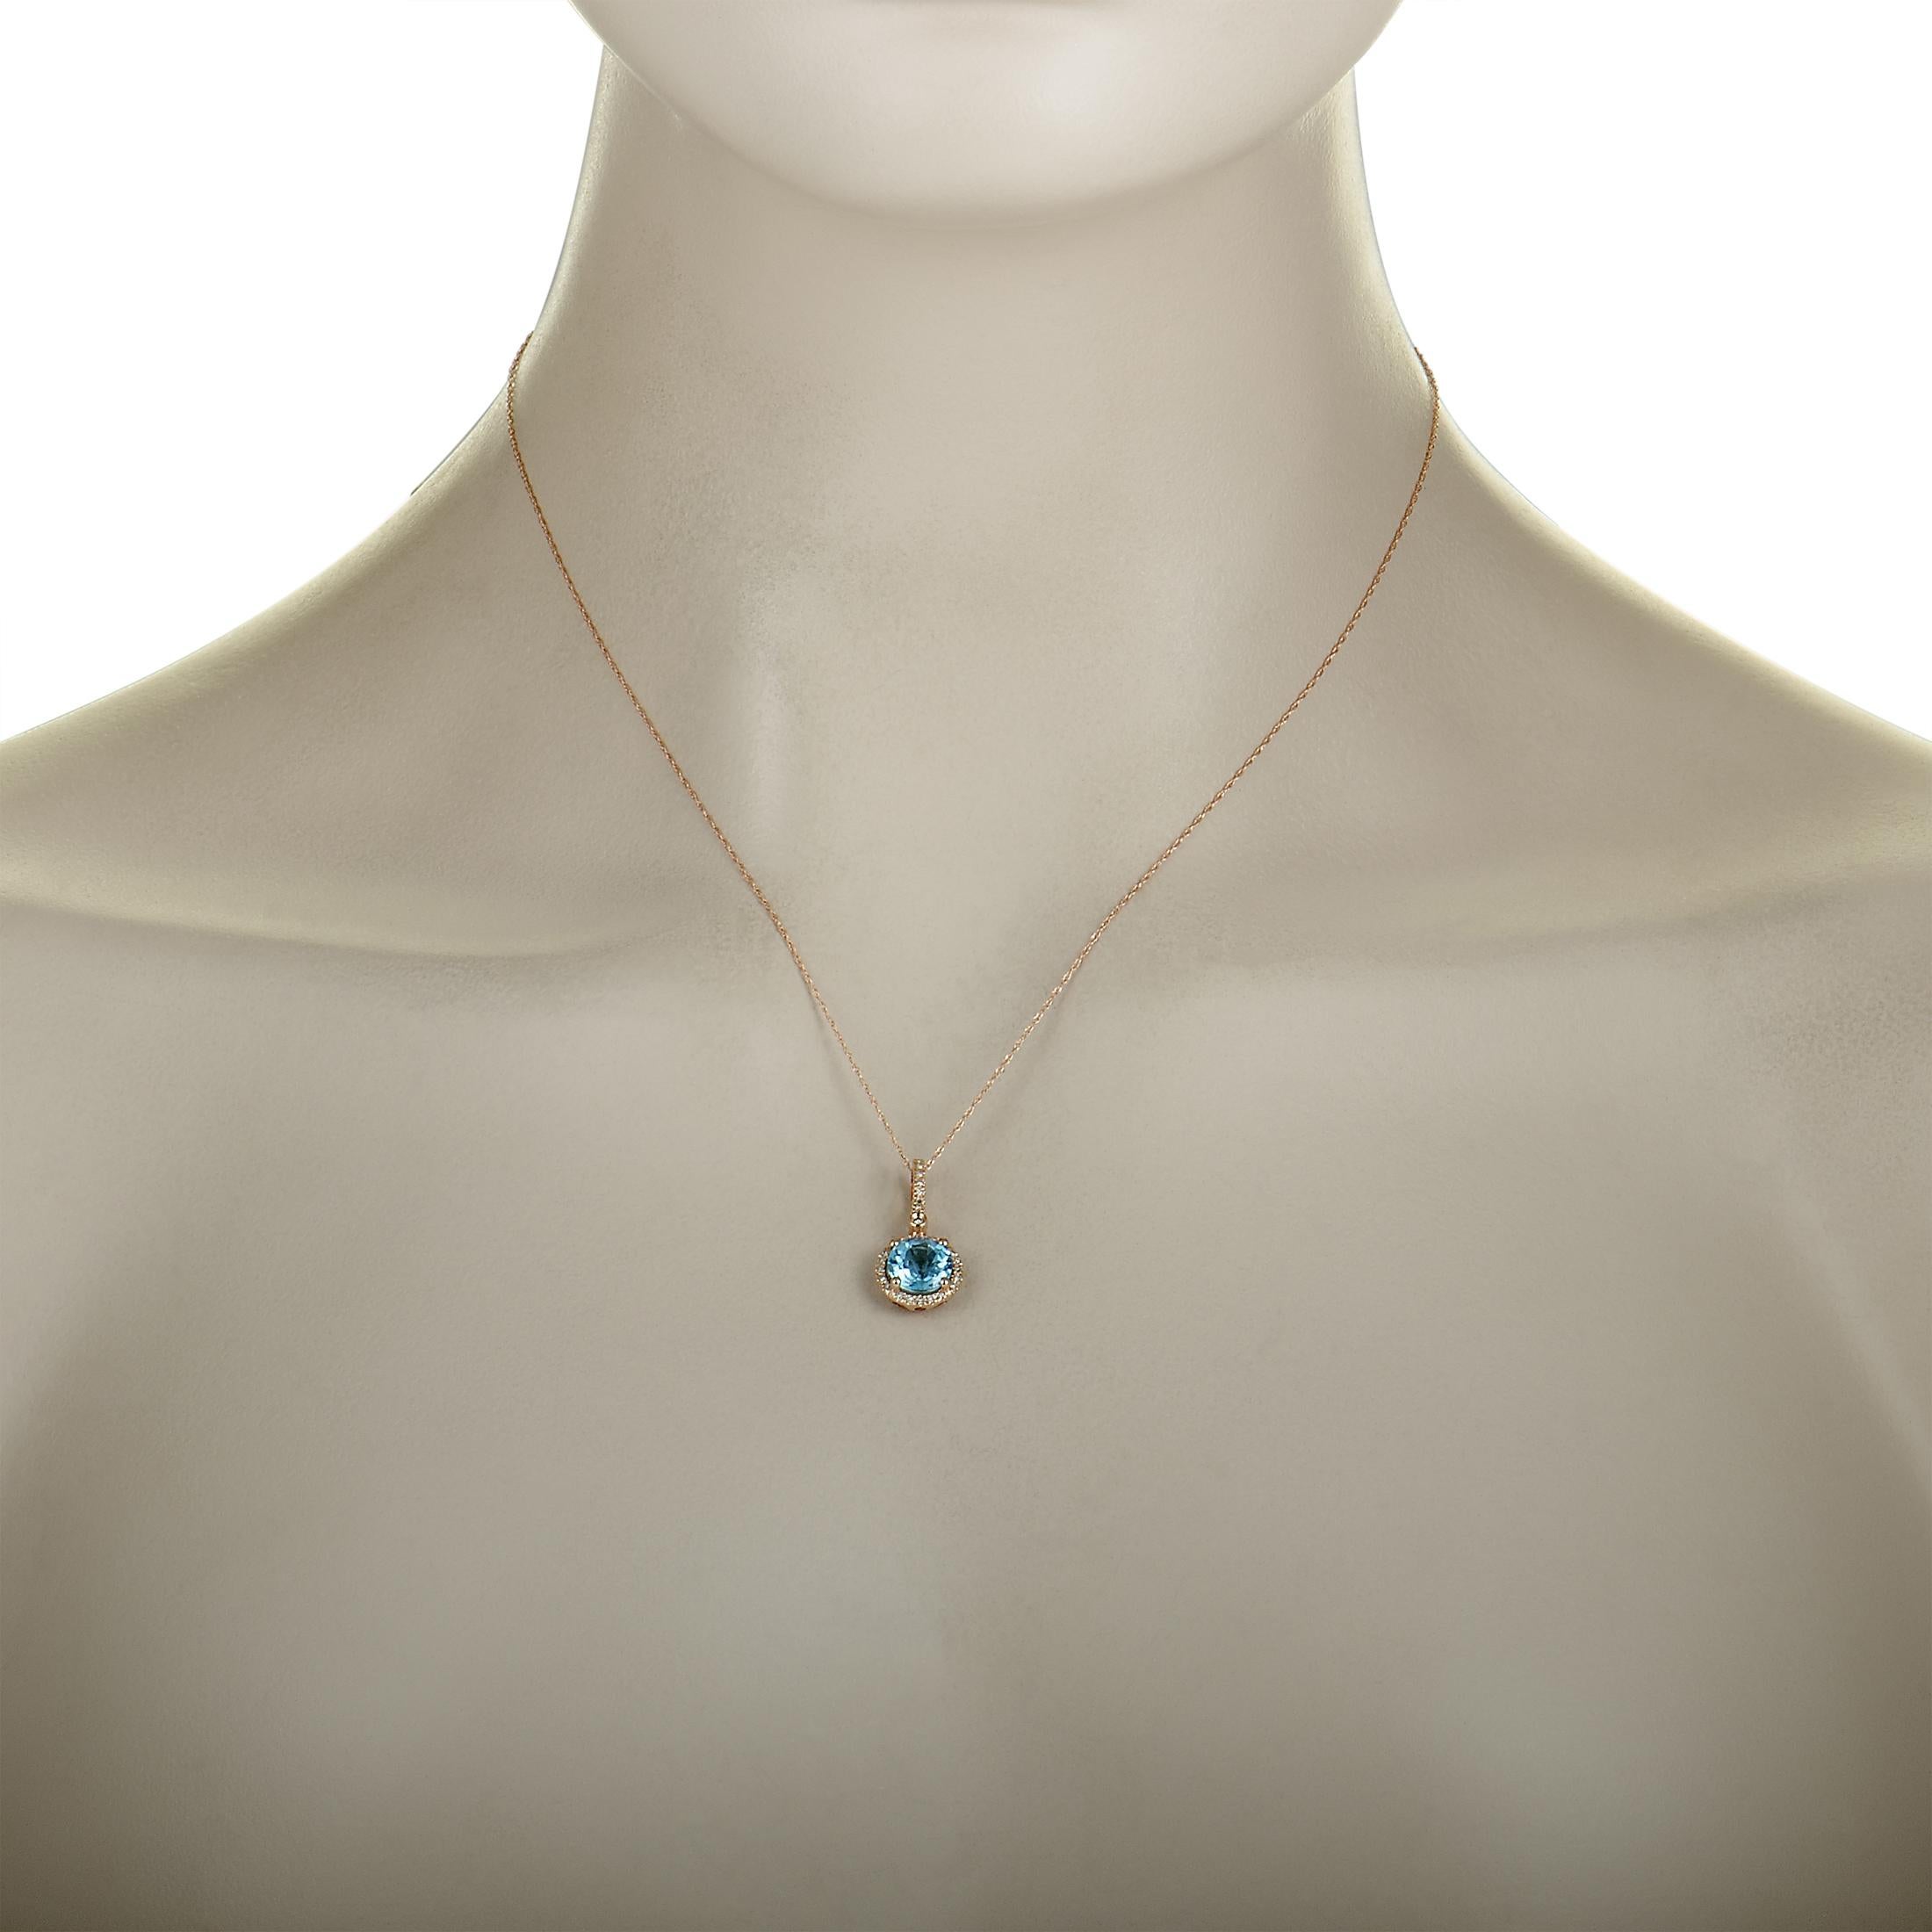 This necklace is made of 14K rose gold and set with a topaz and a total of 0.11 carats of diamonds. It has an 18.00” long chain with spring ring closure, while the pendant measures 0.87” in length and 0.40” in width. The necklace weighs 2.2 grams.
